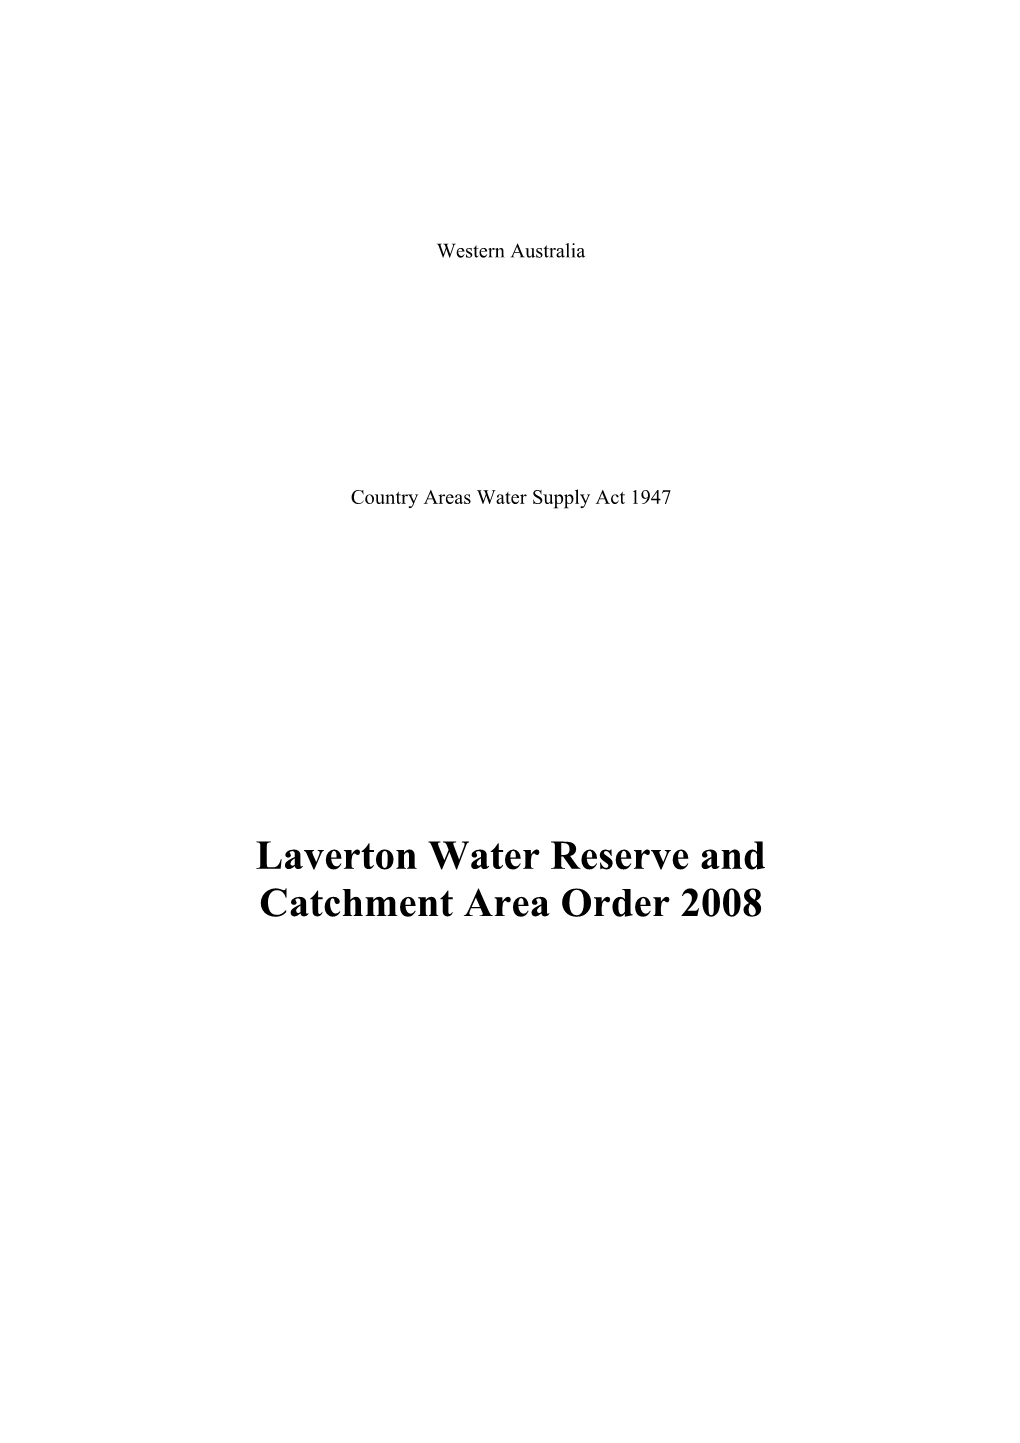 Laverton Water Reserve and Catchment Area Order 2008 - 00-A0-00